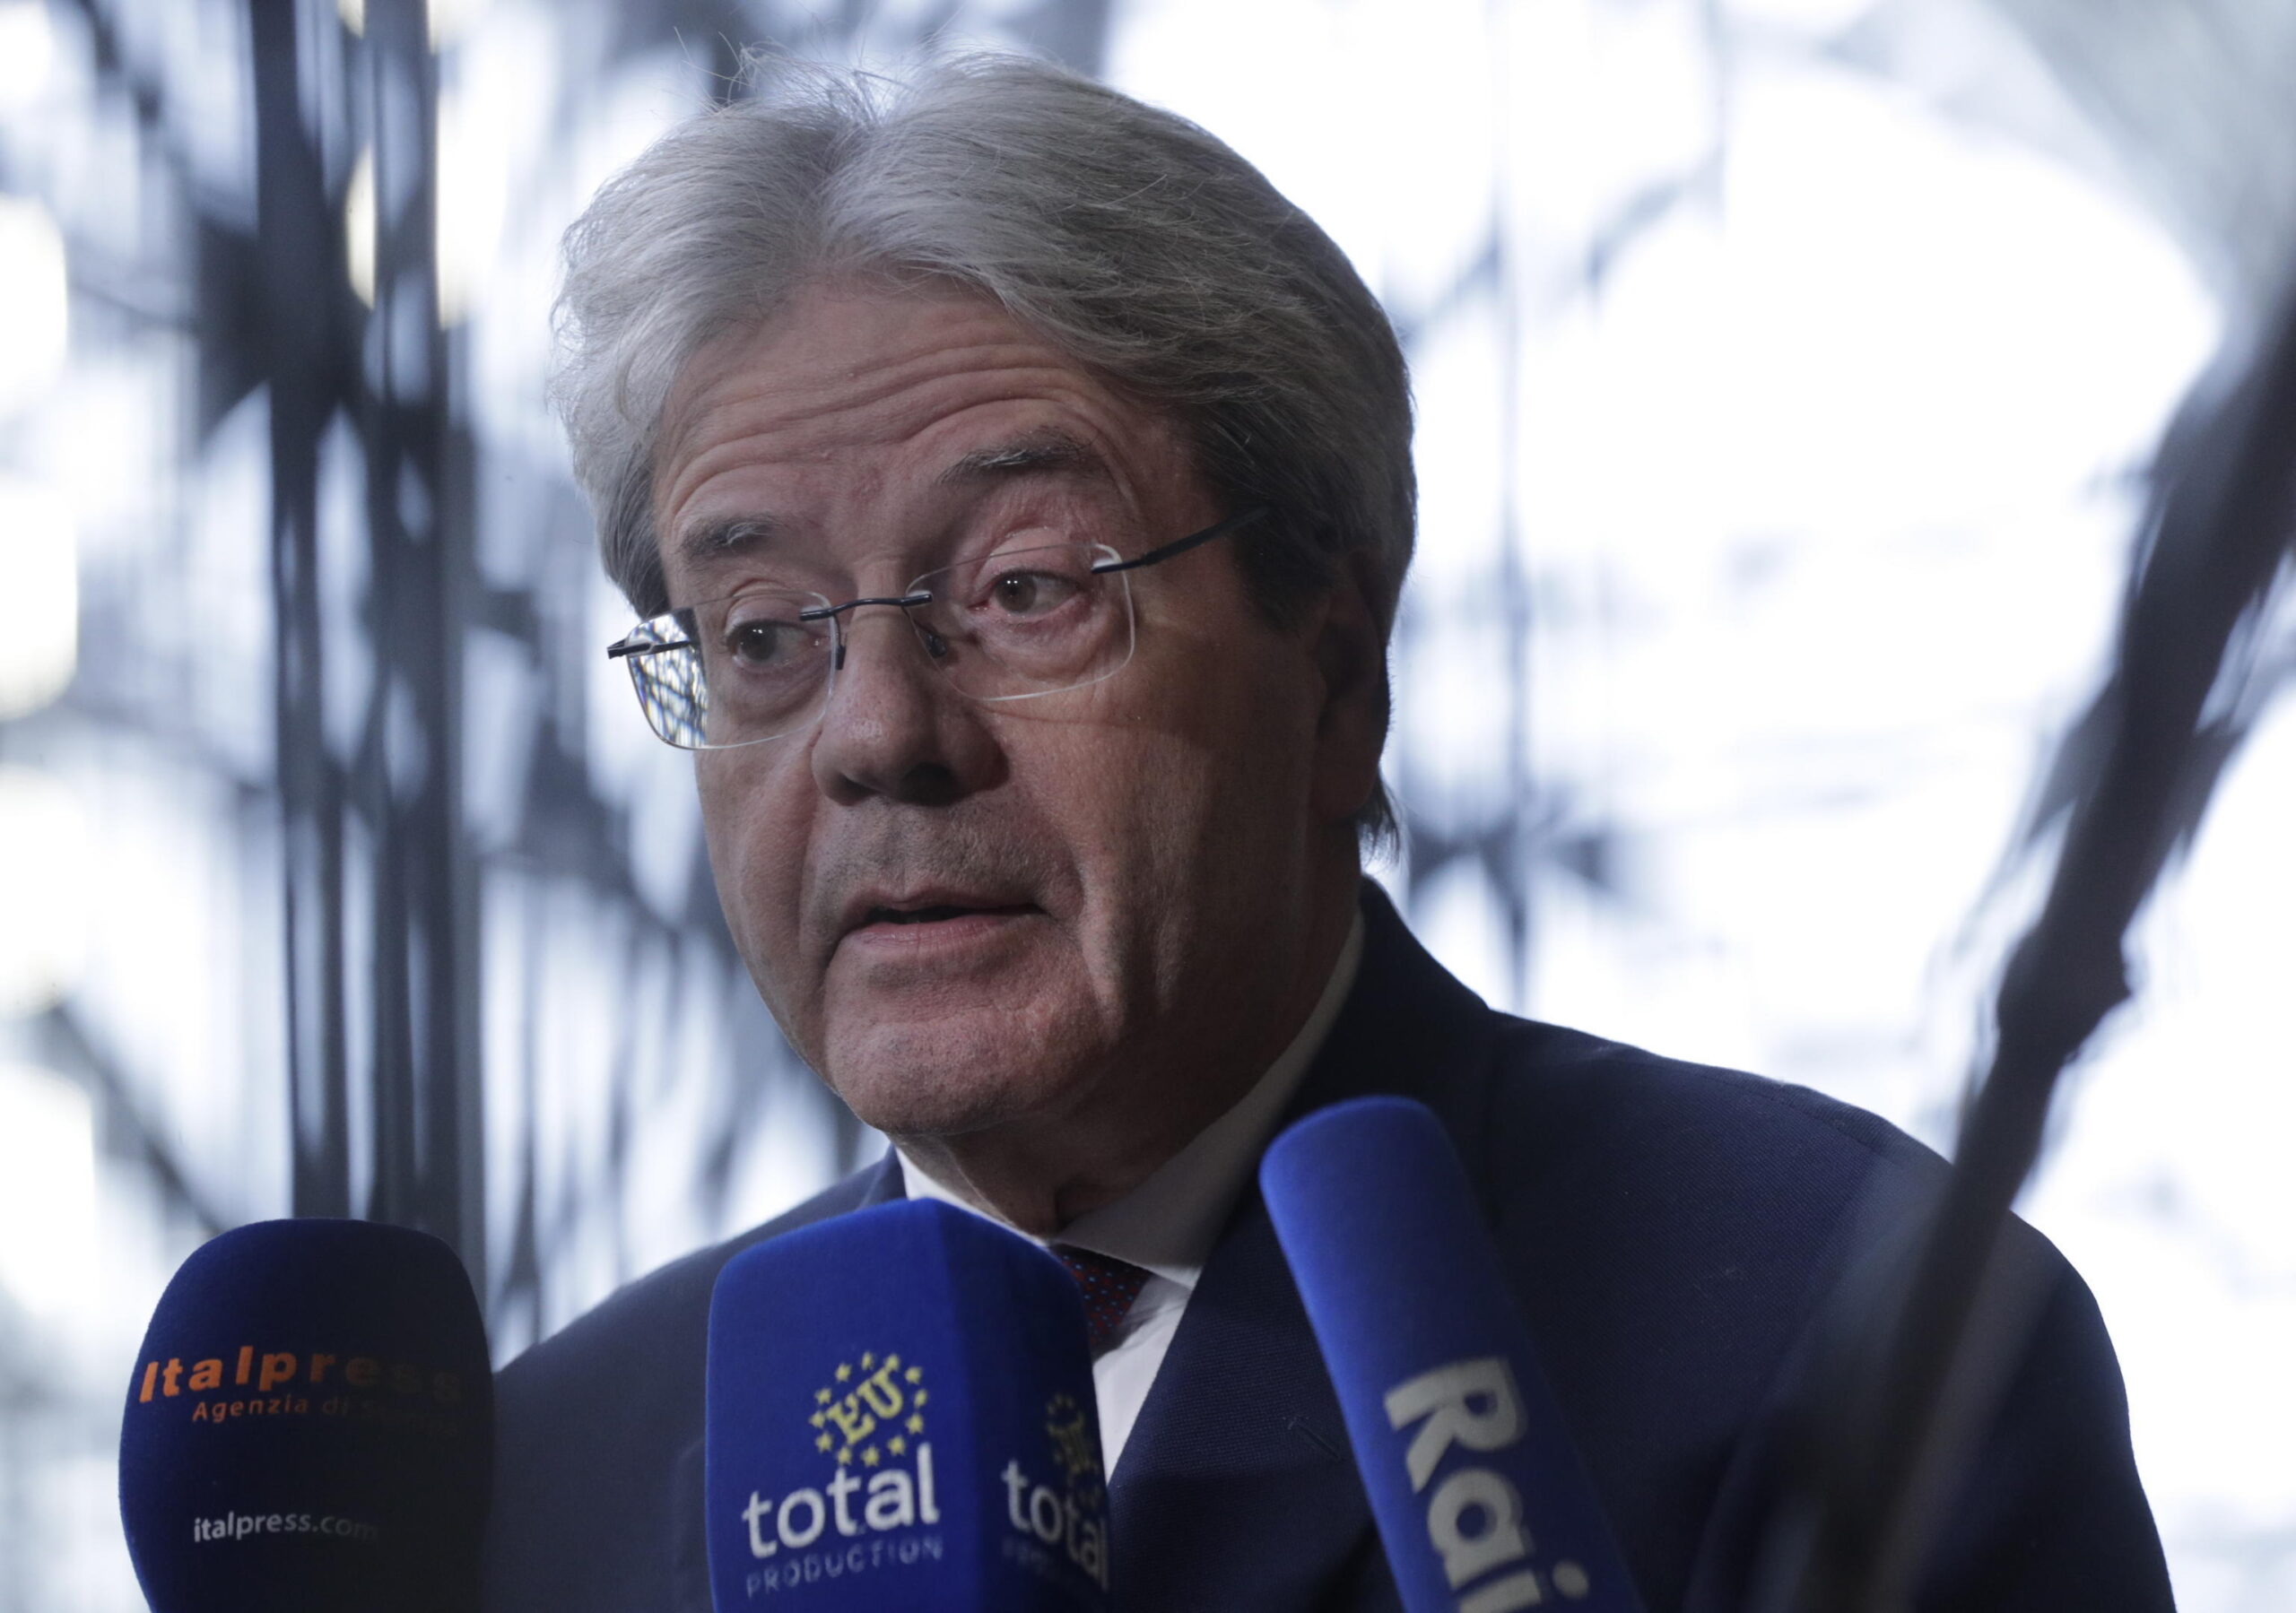 European Commissioner in charge Economy Paolo Gentiloni speaks to the media at the start of Eurogroup finance ministers meeting in Brussels, Belgium, 16 January 2023. ANSA/OLIVIER HOSLET